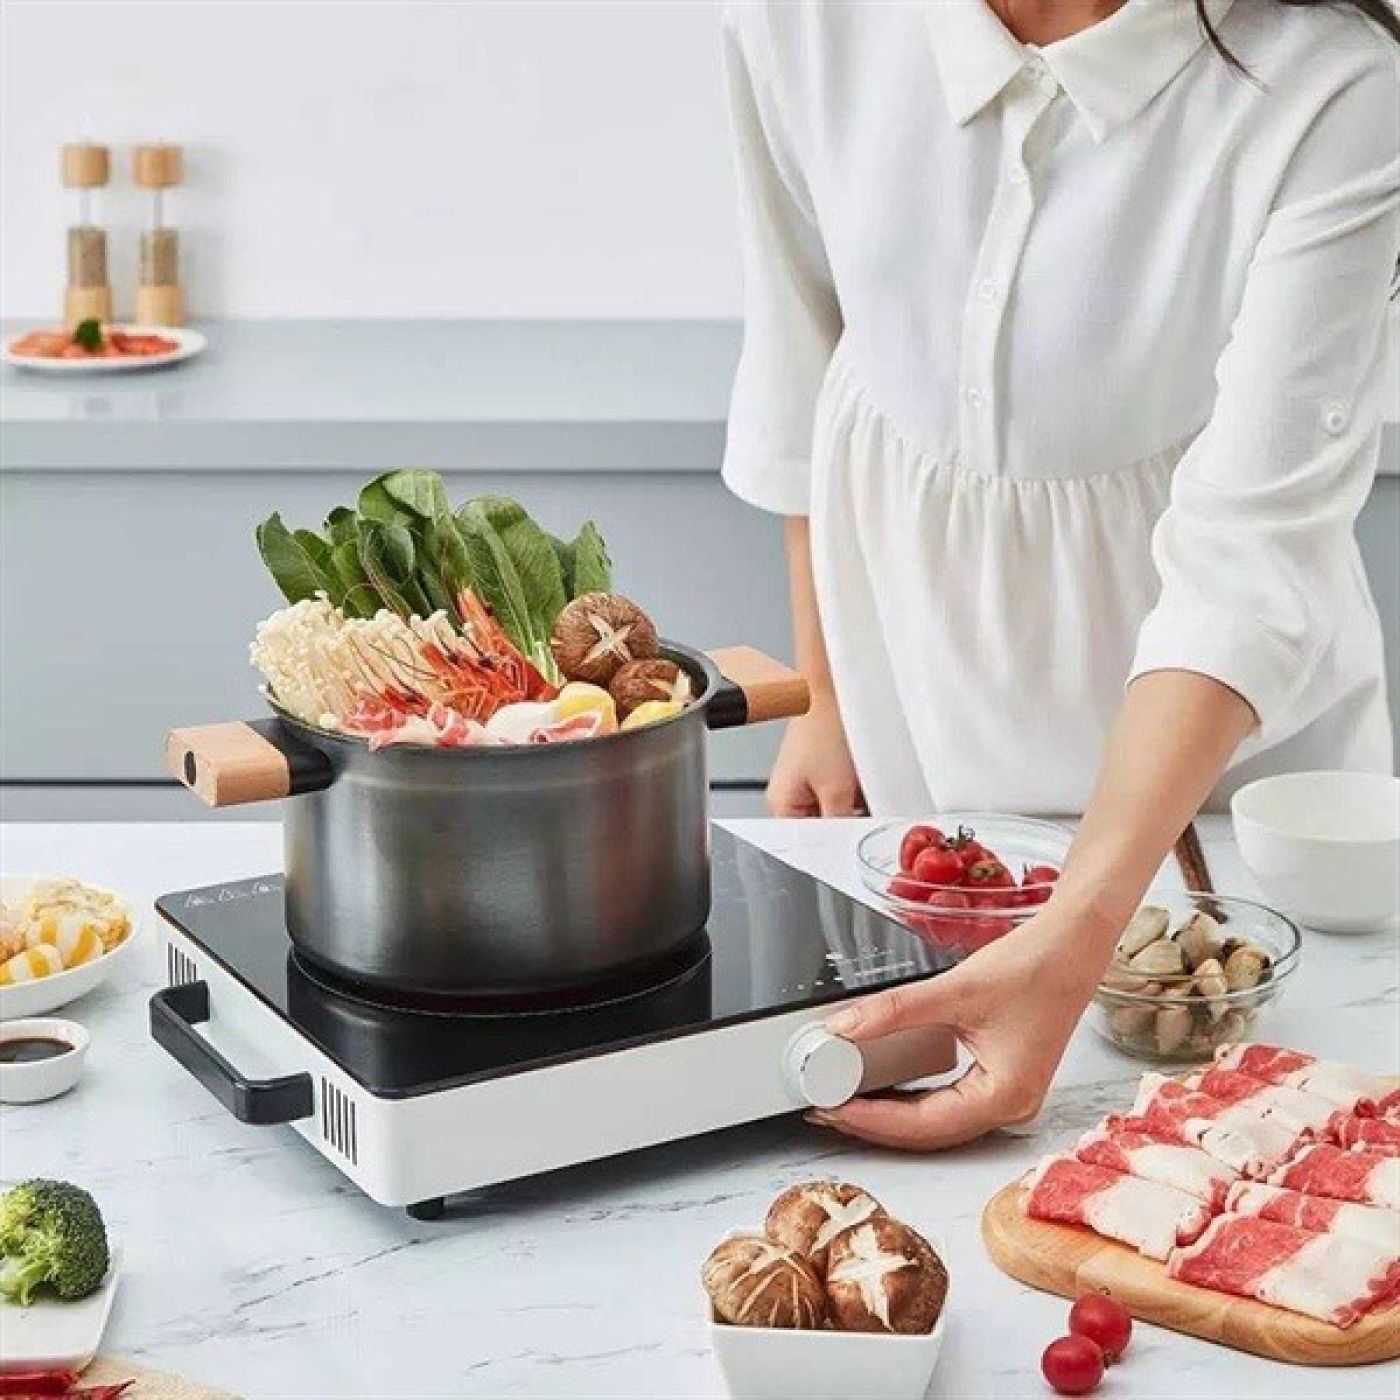 Bếp hồng ngoại Xiaomi Ocooker CR-DT01 Electric Pottery Stove